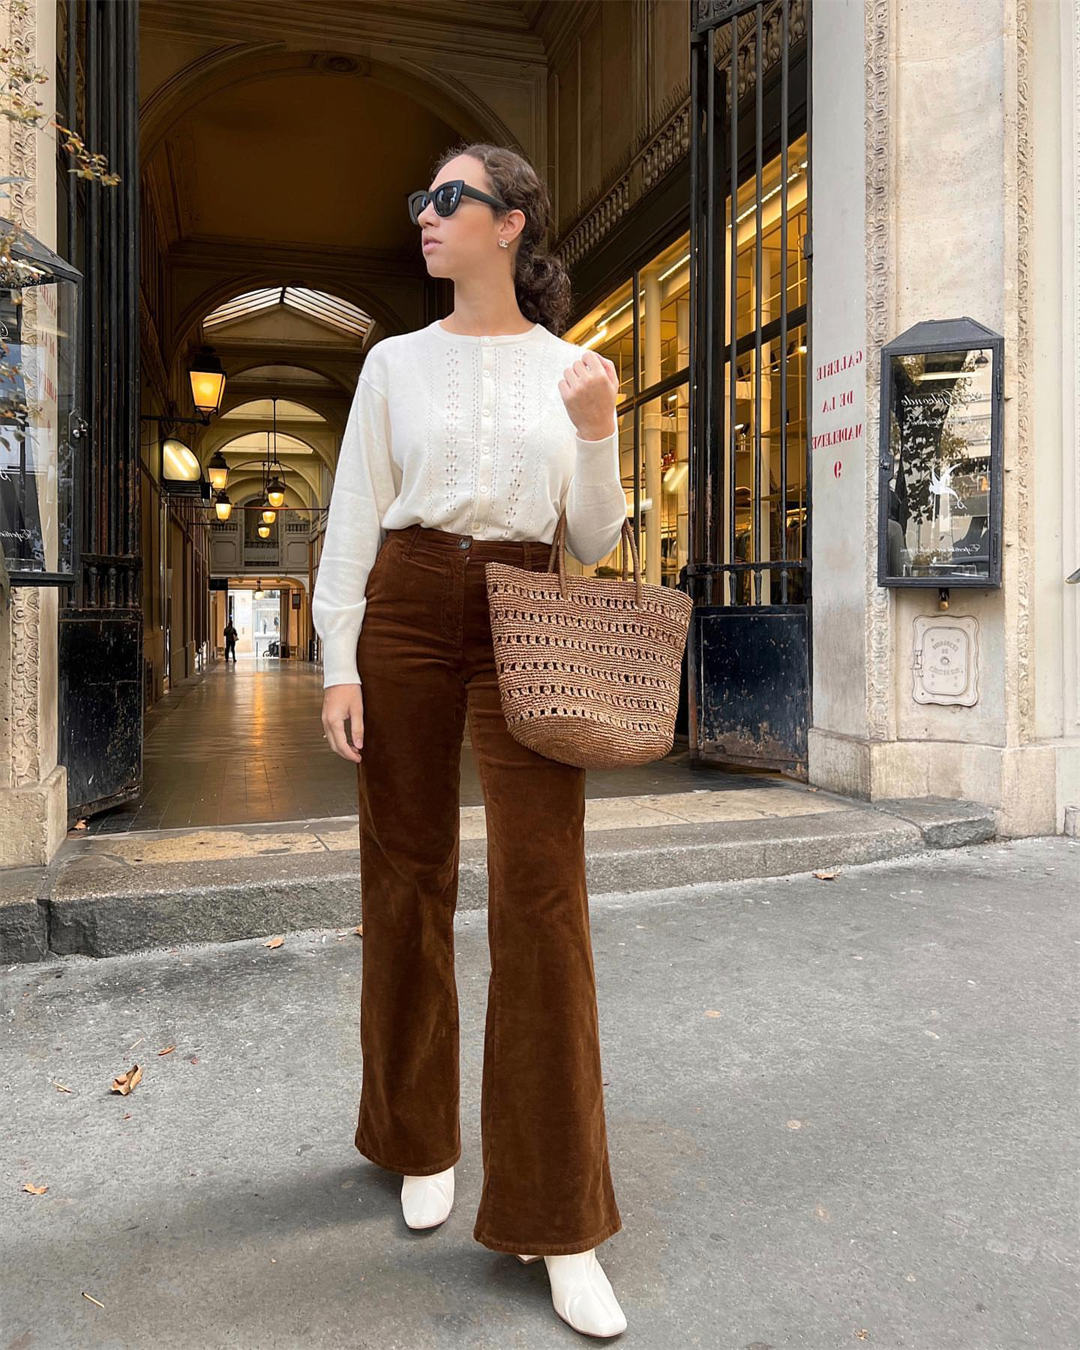 40 Corduroy Pants Outfit Ideas for Women - Her Style Code